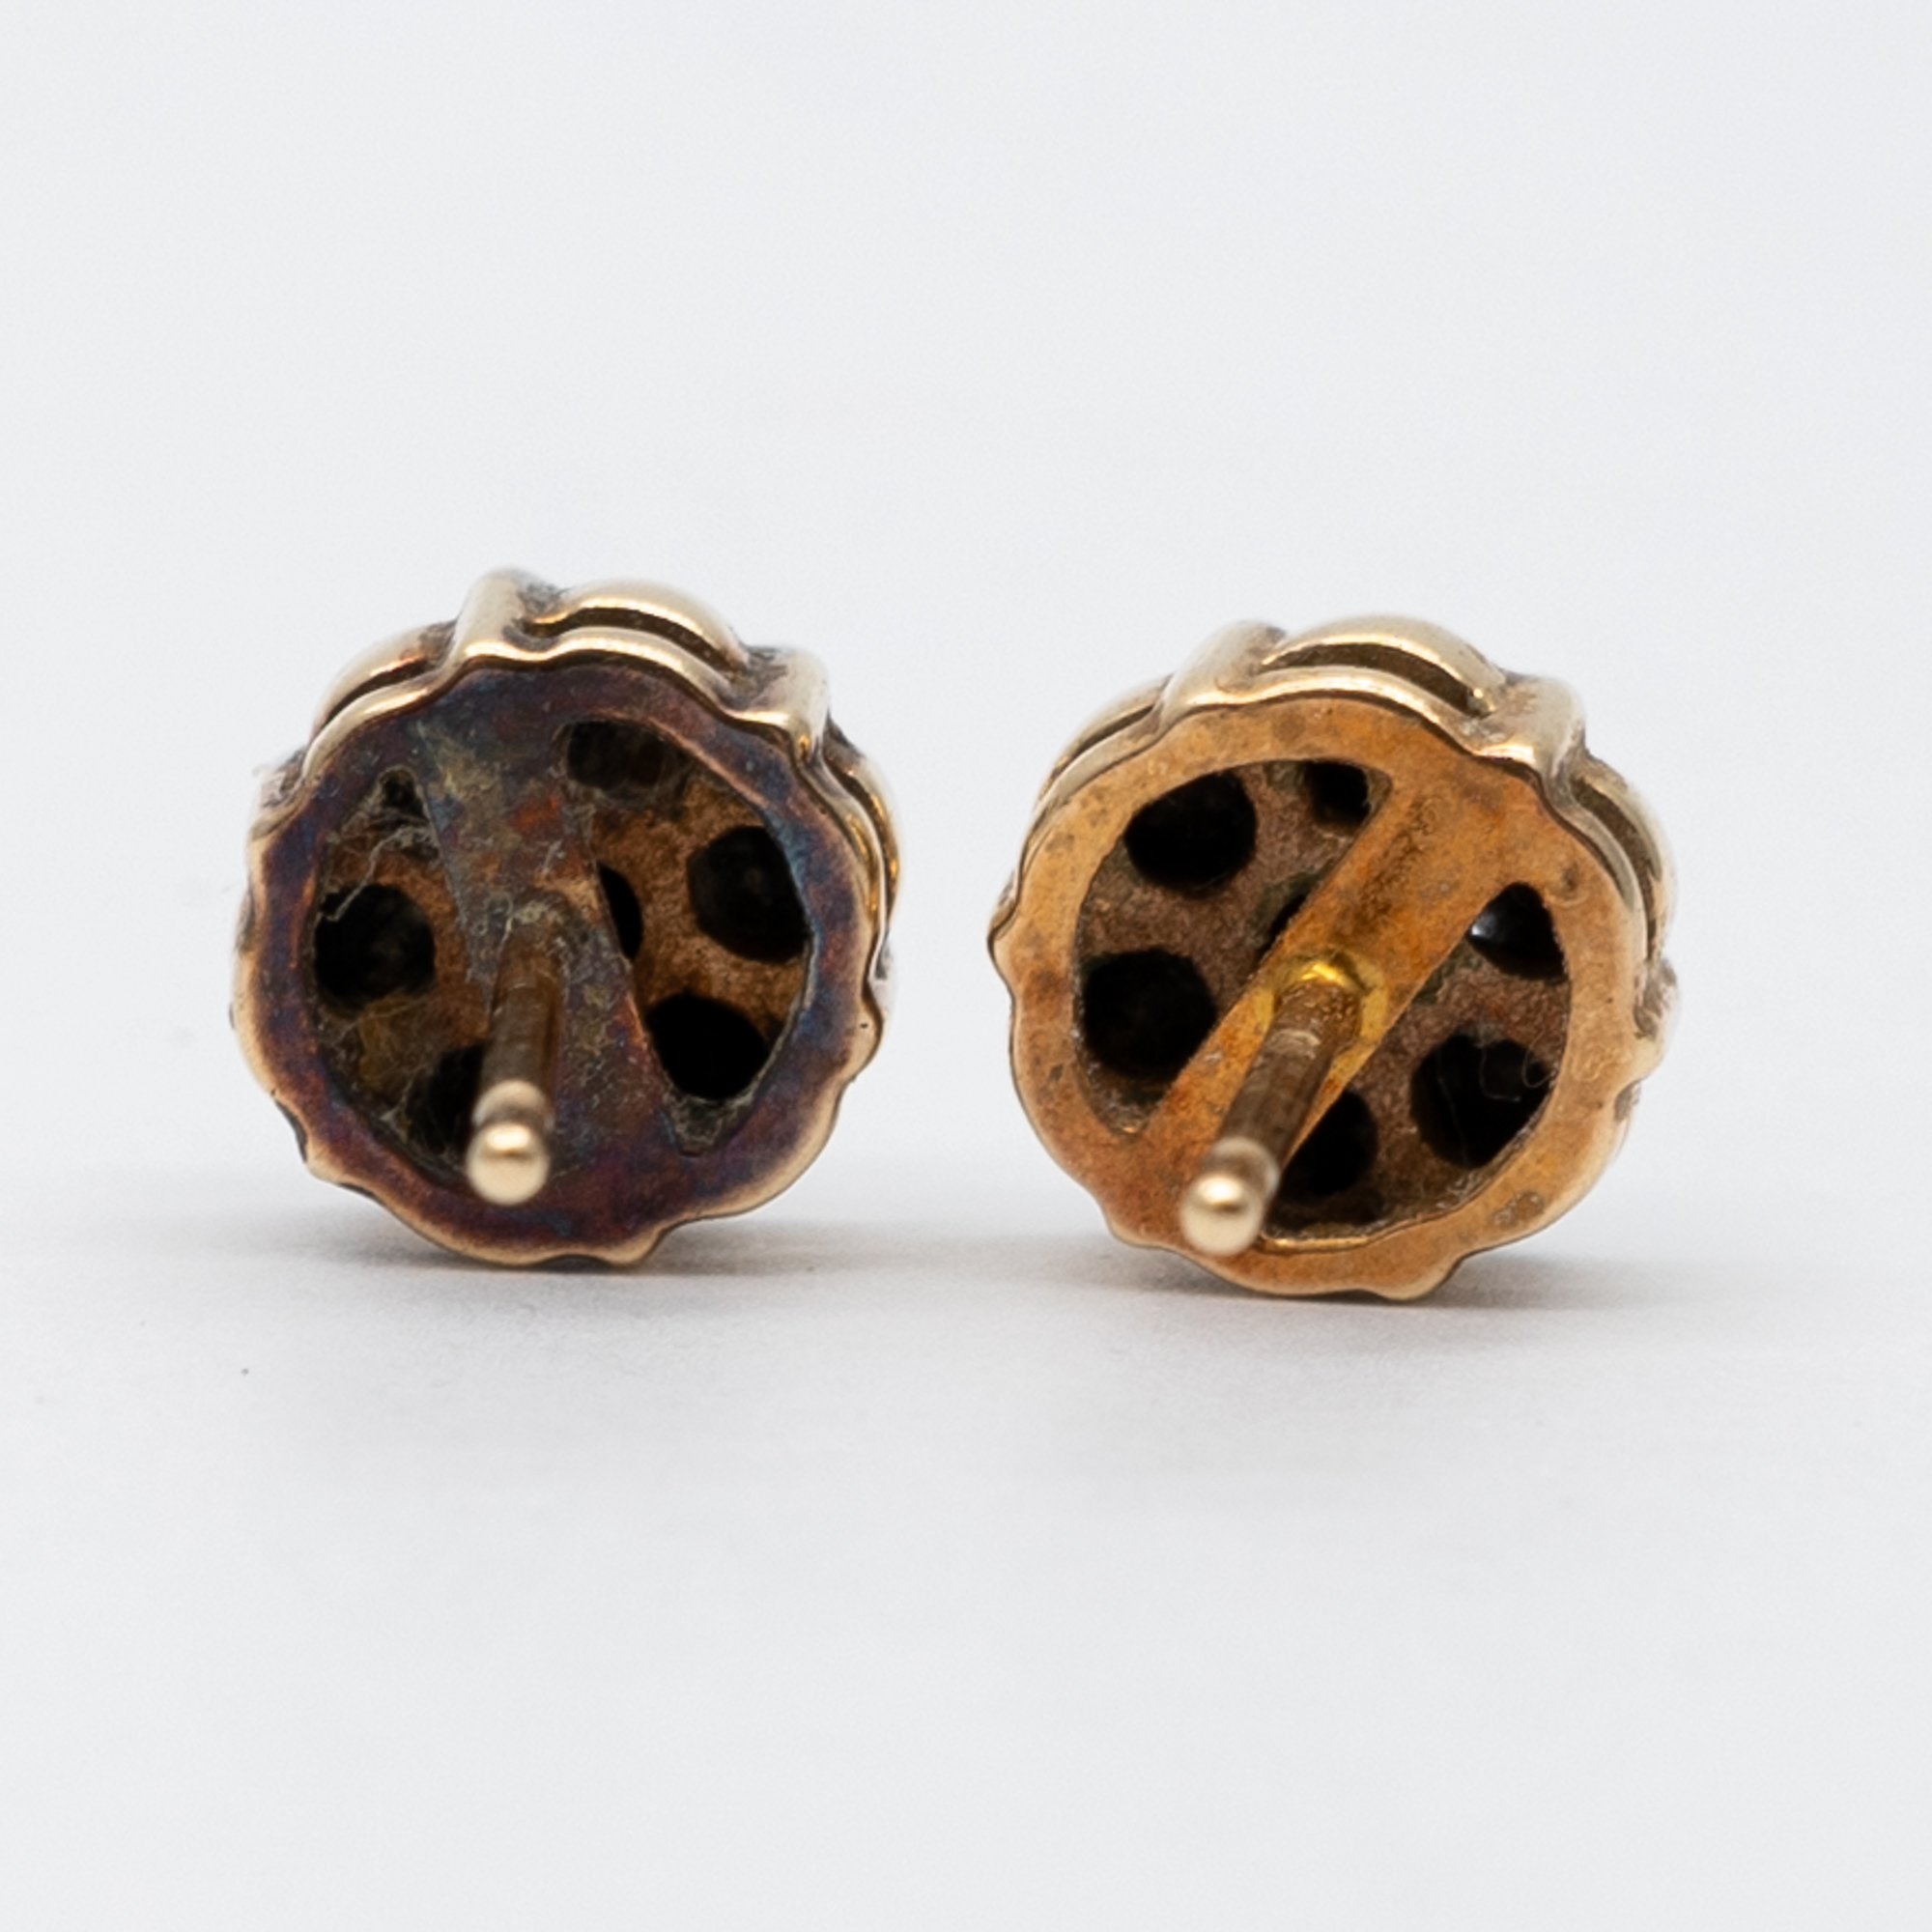 A pair of 9ct yellow gold black diamond stud earrings - Image 3 of 4